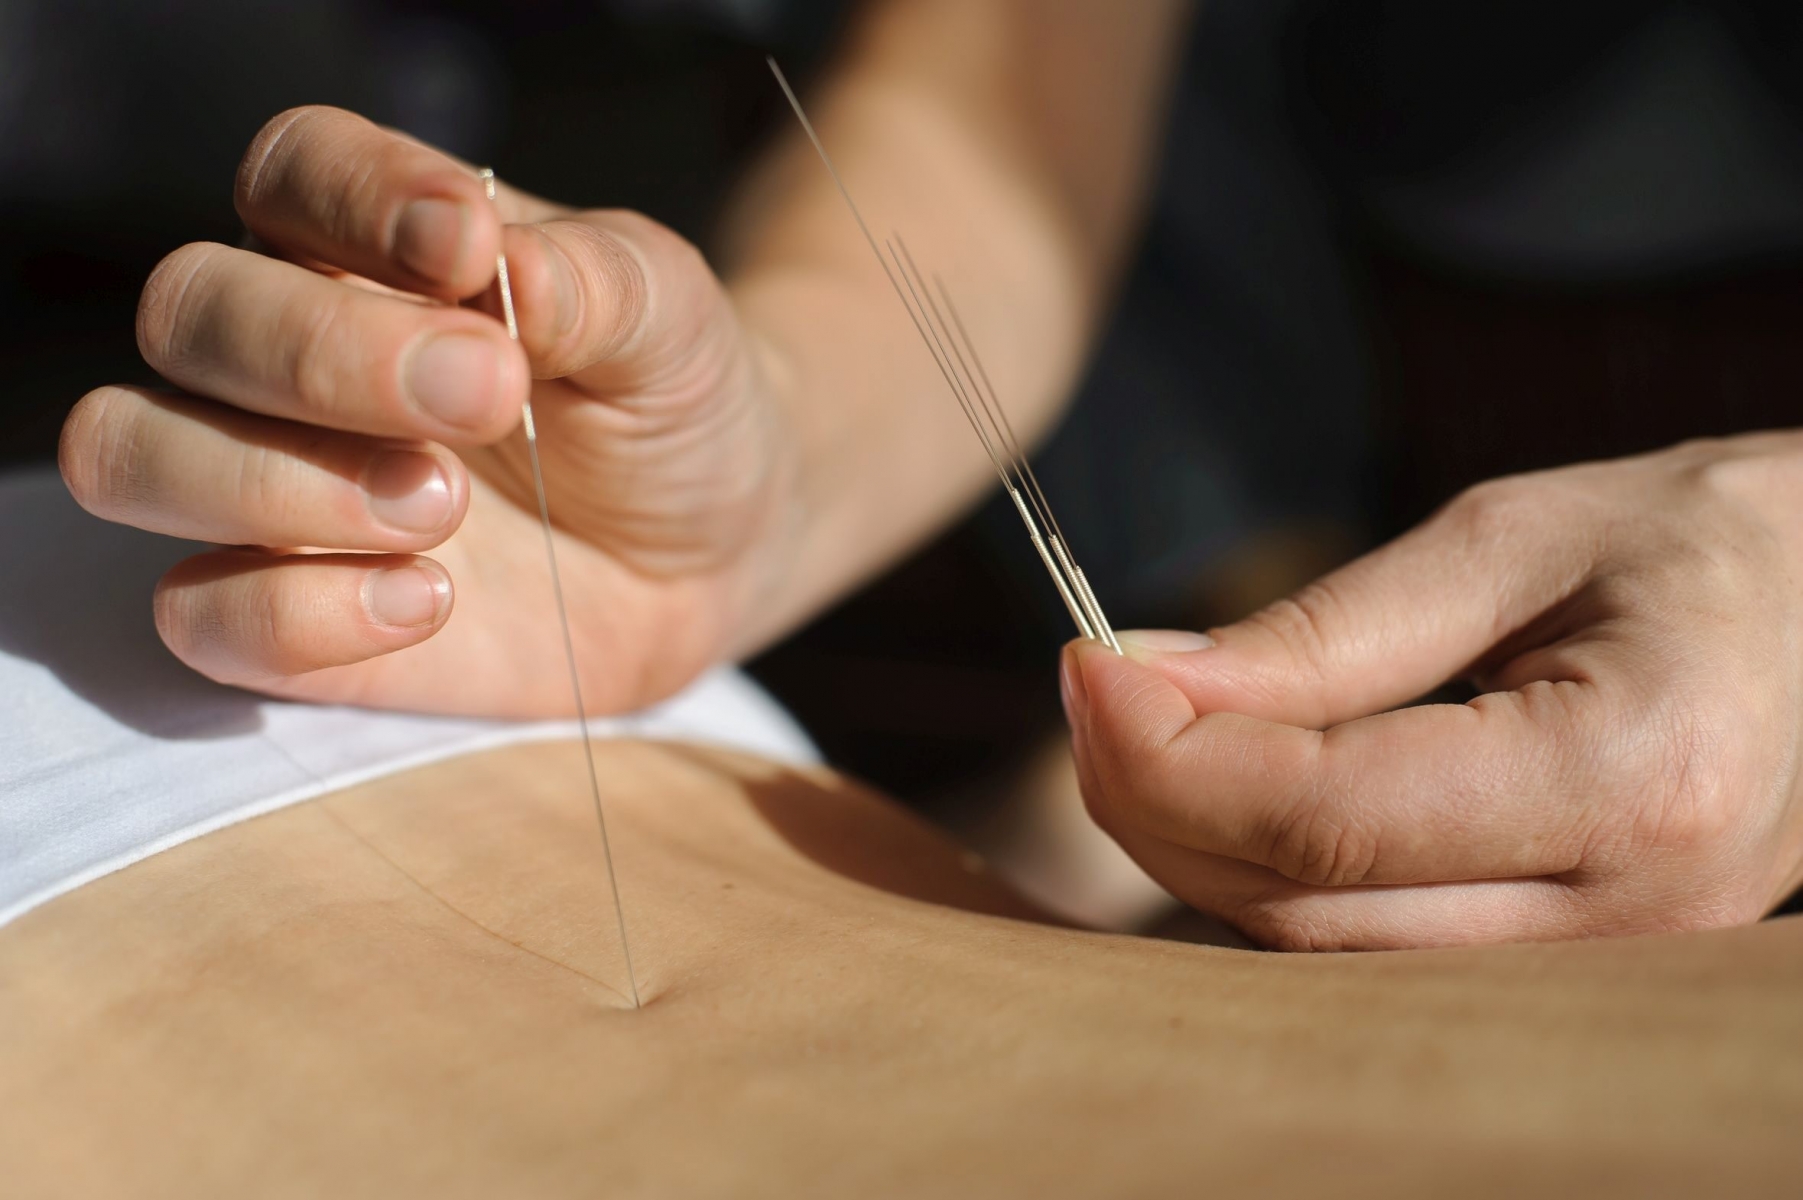 Therapist with one hand holding the needle with the other hand enters their desired point on the patient's back Acupuncture.Chinese medicine treatmen